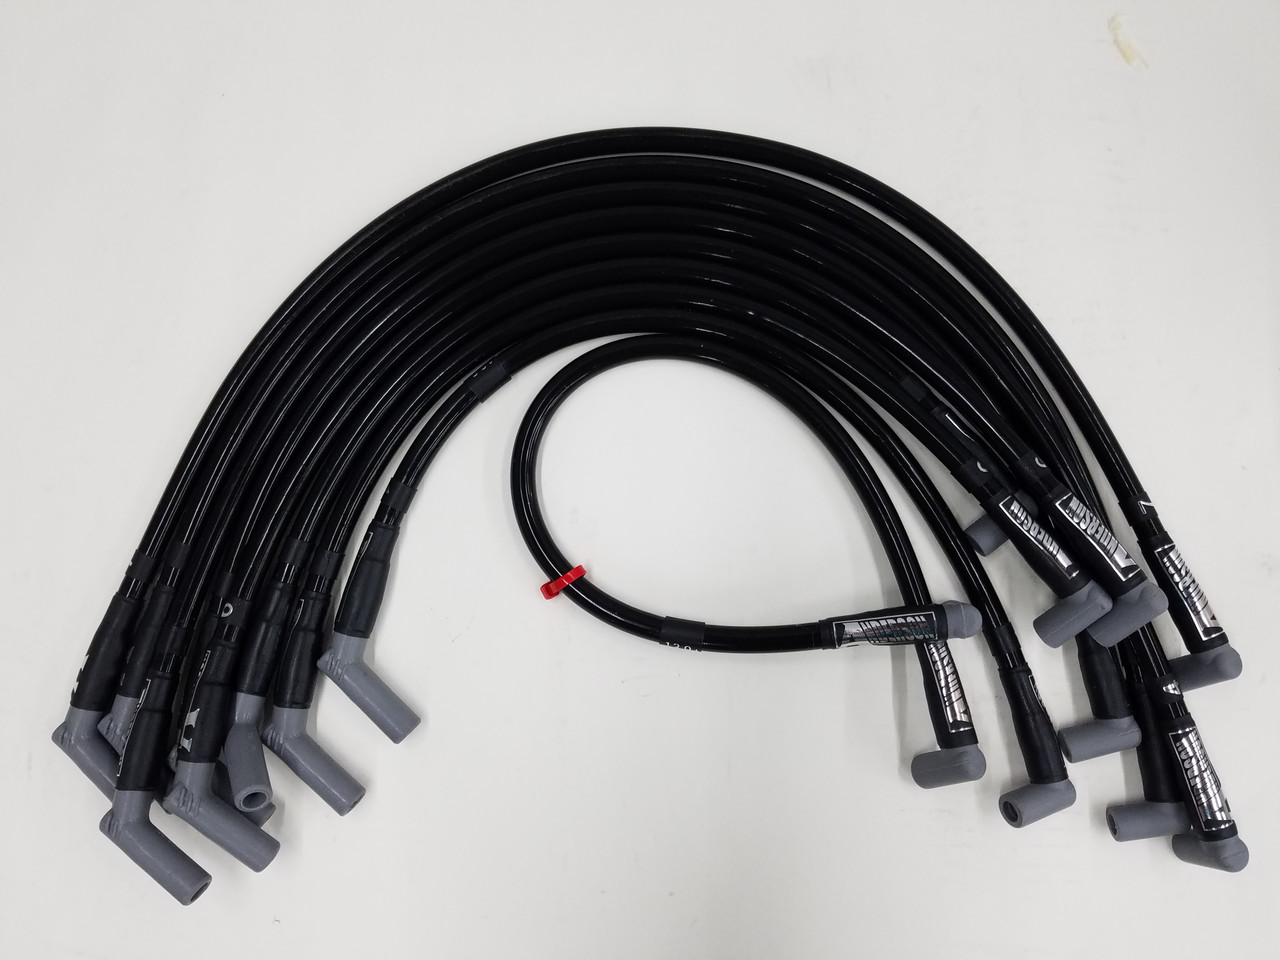 Anderson Super 14 Extreme Spark Plug Wires Black. Fits 86-93 5.0L Mustang